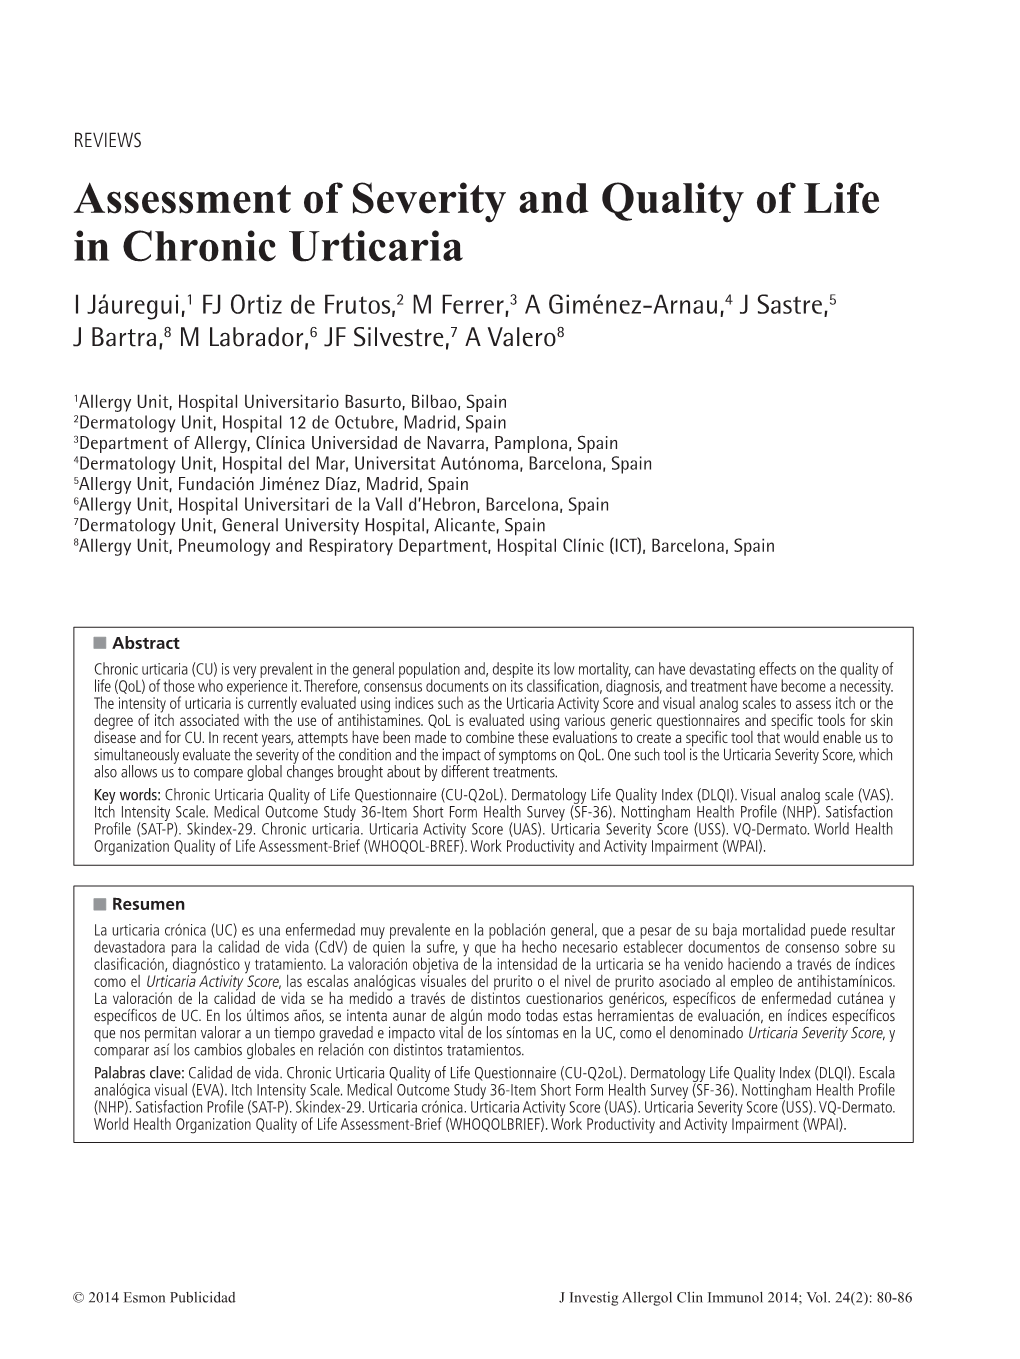 Assessment of Severity and Quality of Life in Chronic Urticaria